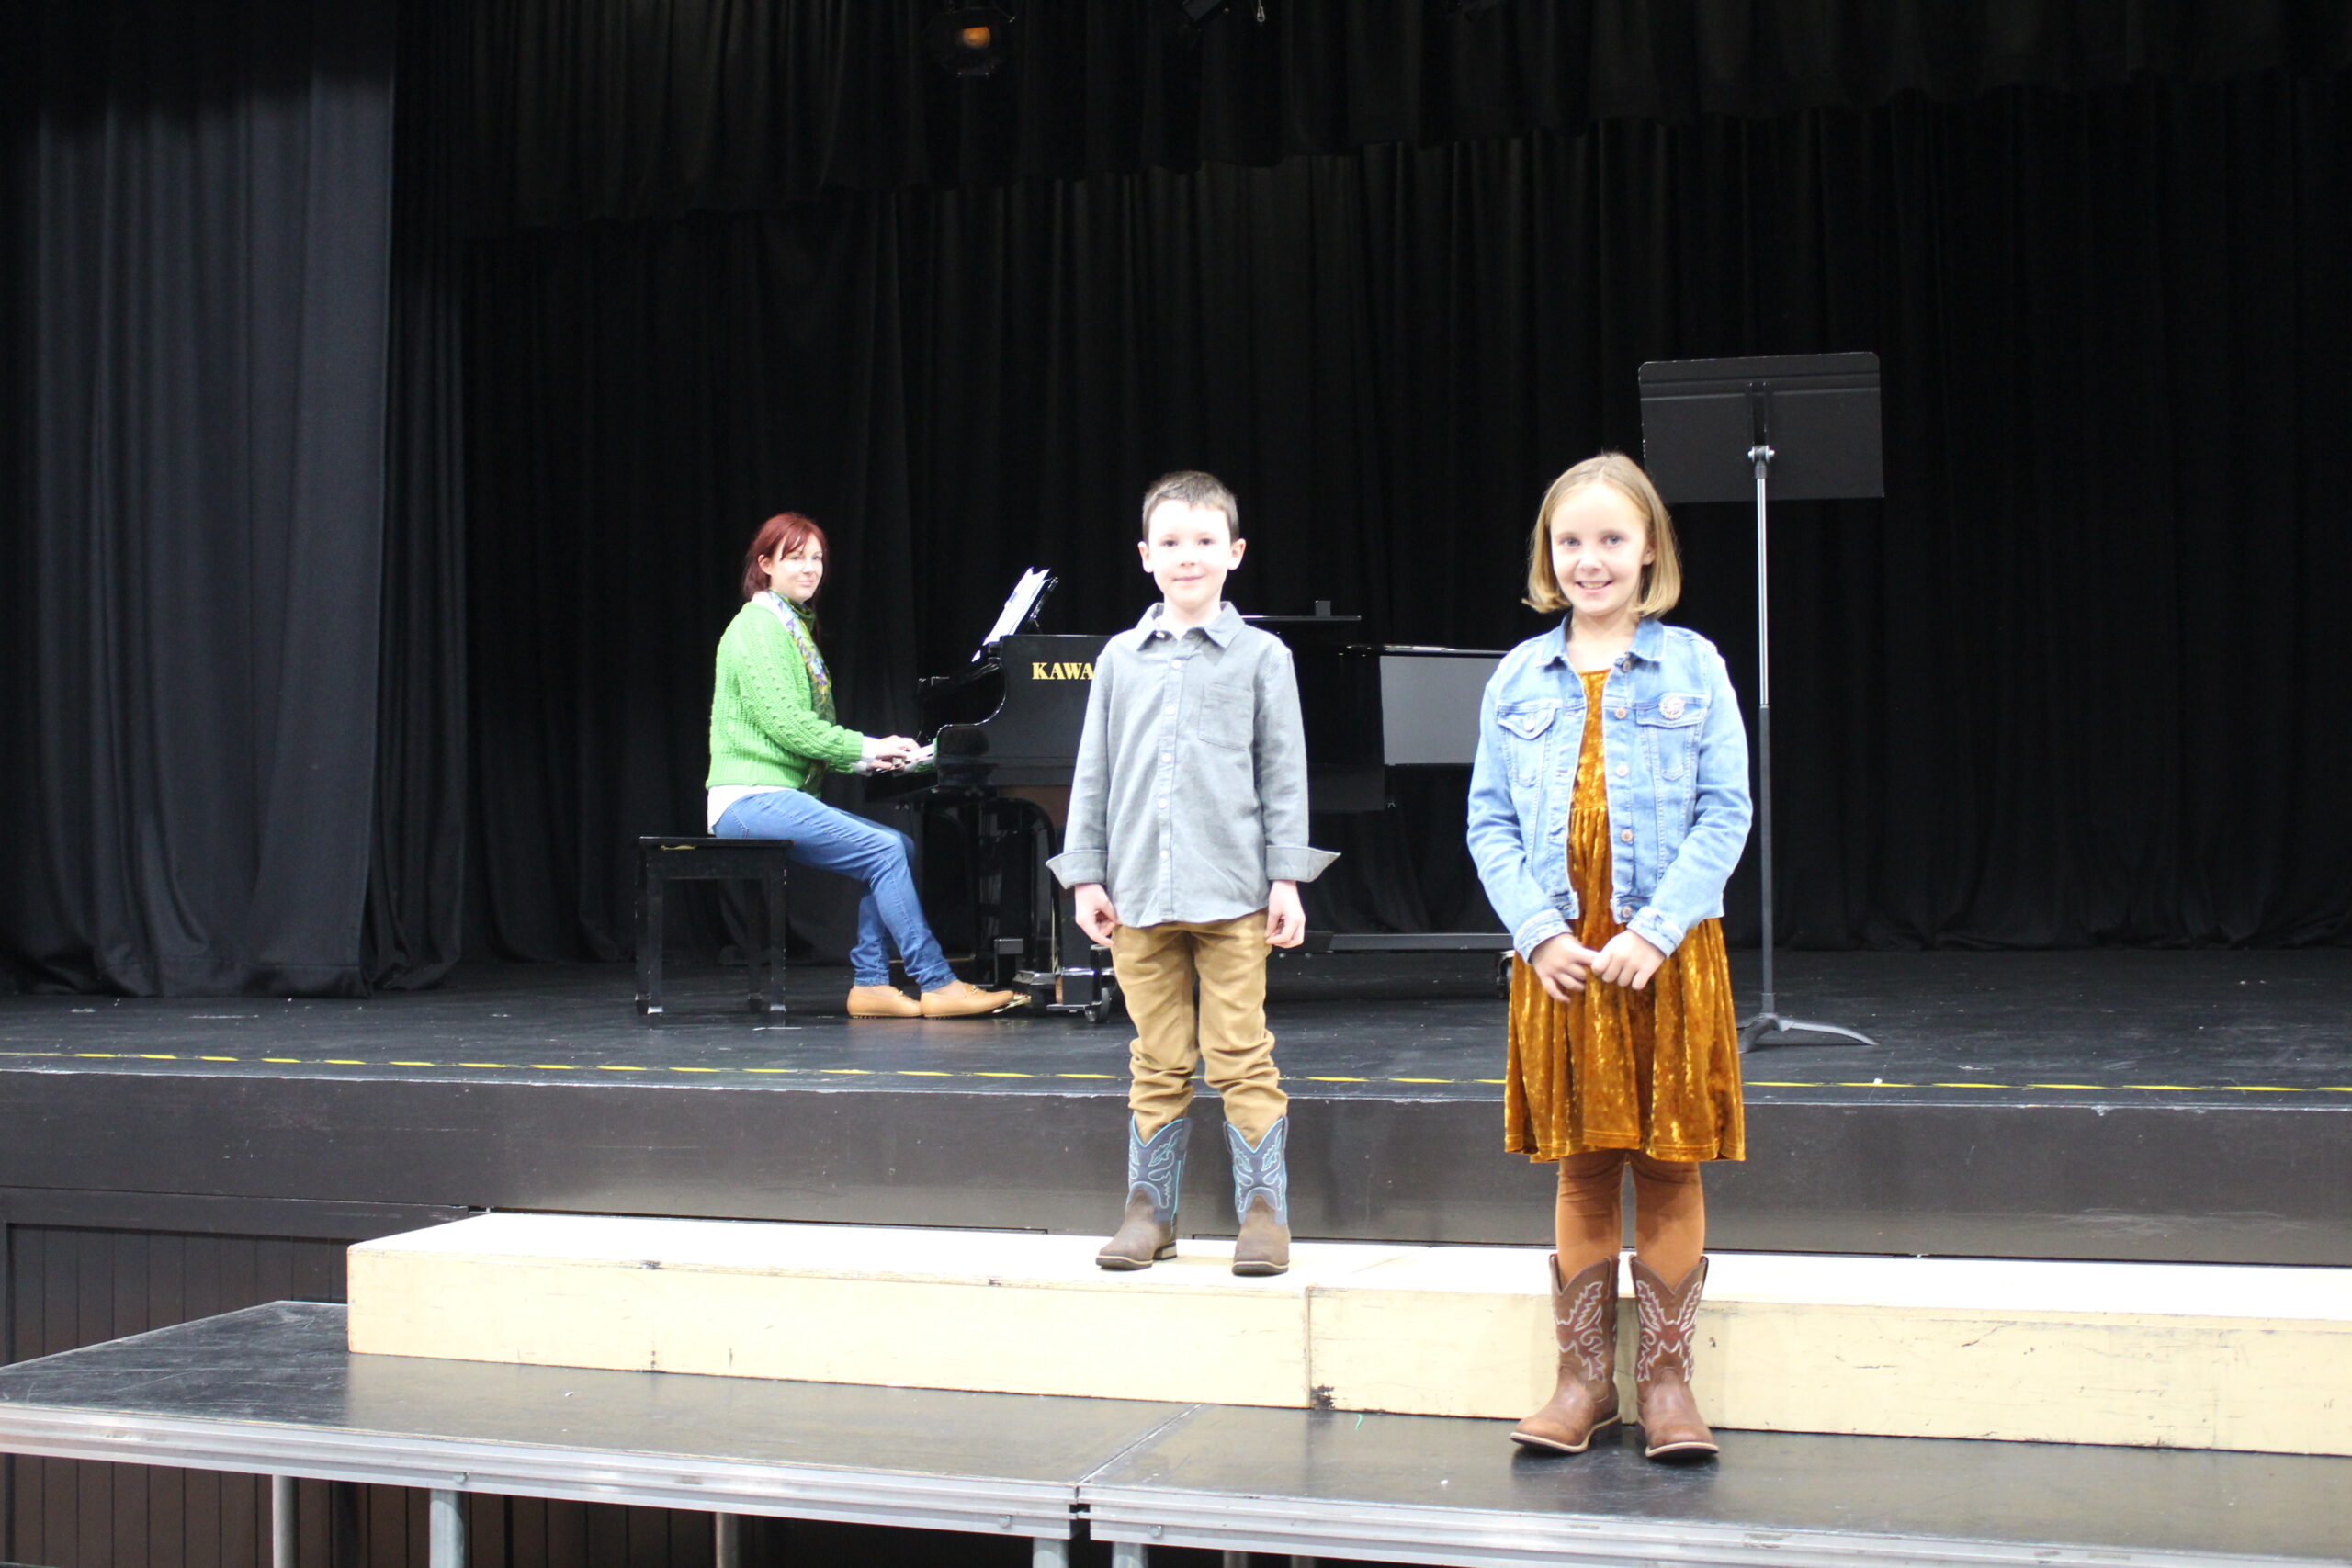 Winners of the primary duet vocal section Hugo Lillyman and Ruby-Tuesday Davis-Drenkhahn with their mother Jacqualyn Drenkhahn (in back) on piano.